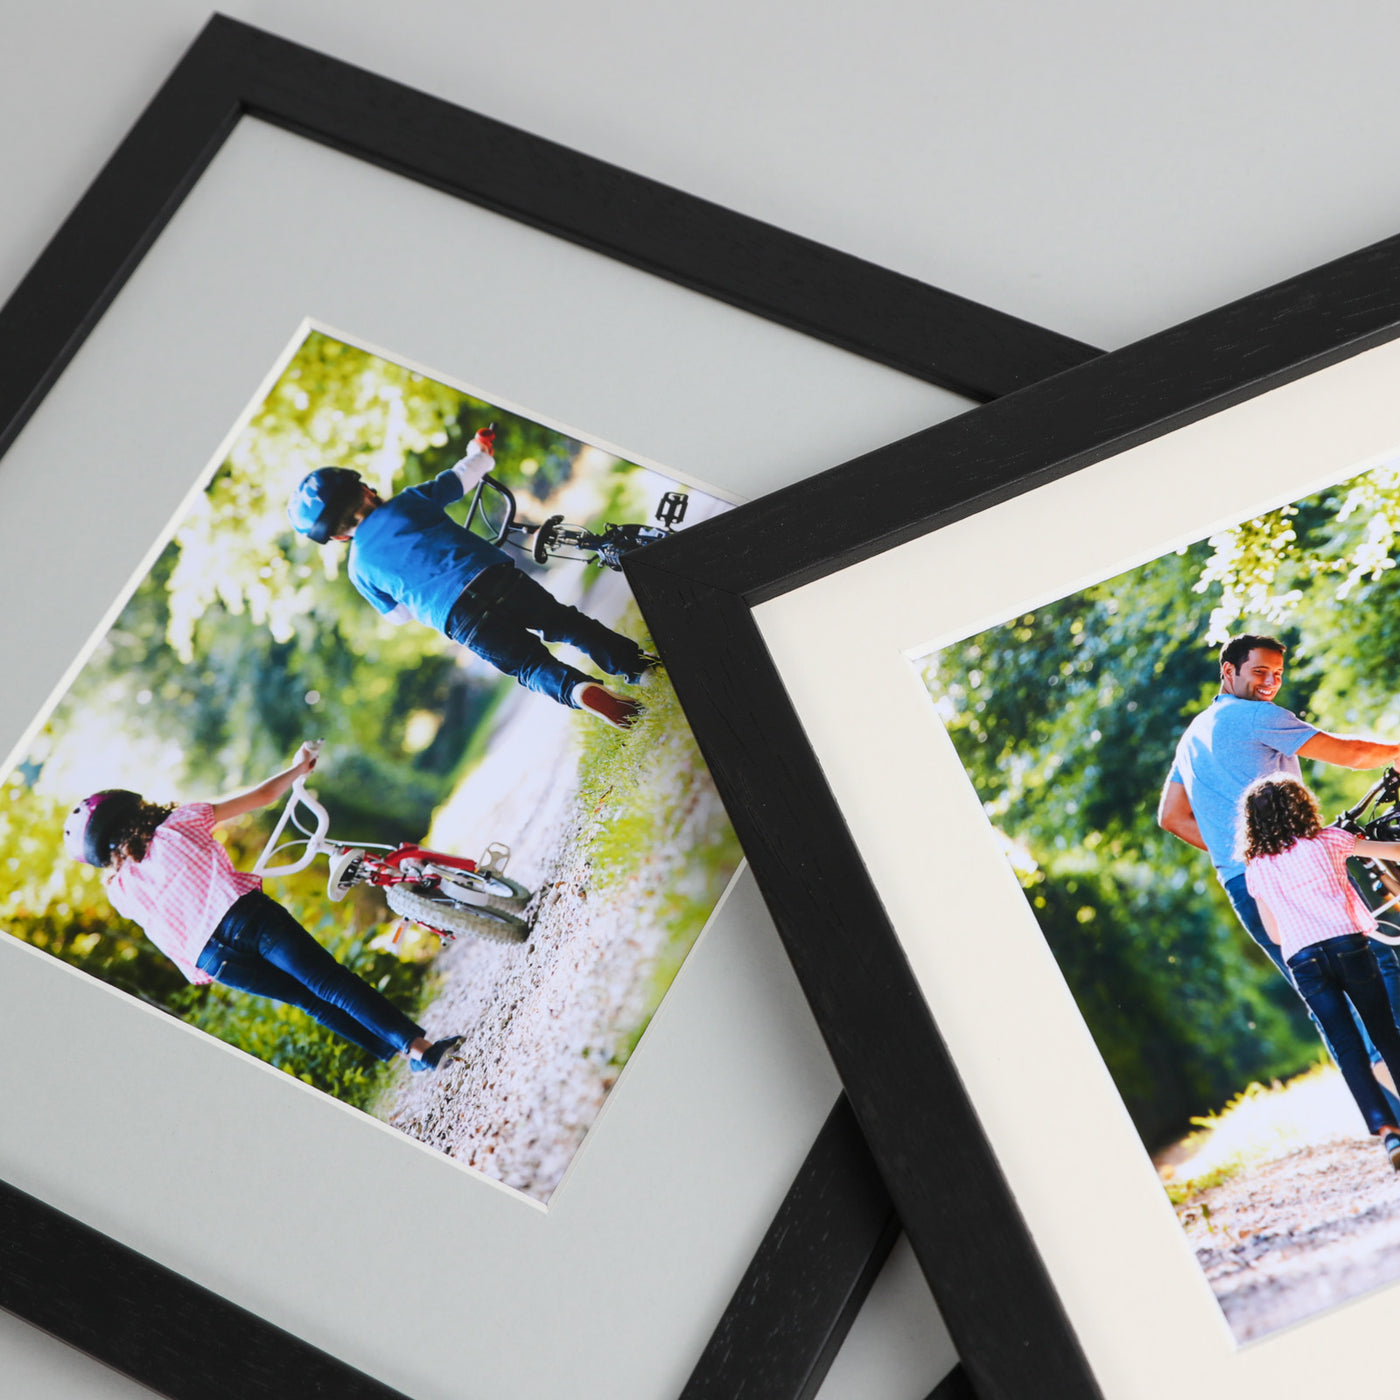 12x12 Classic Black Picture Frame with a 10x10 Mount